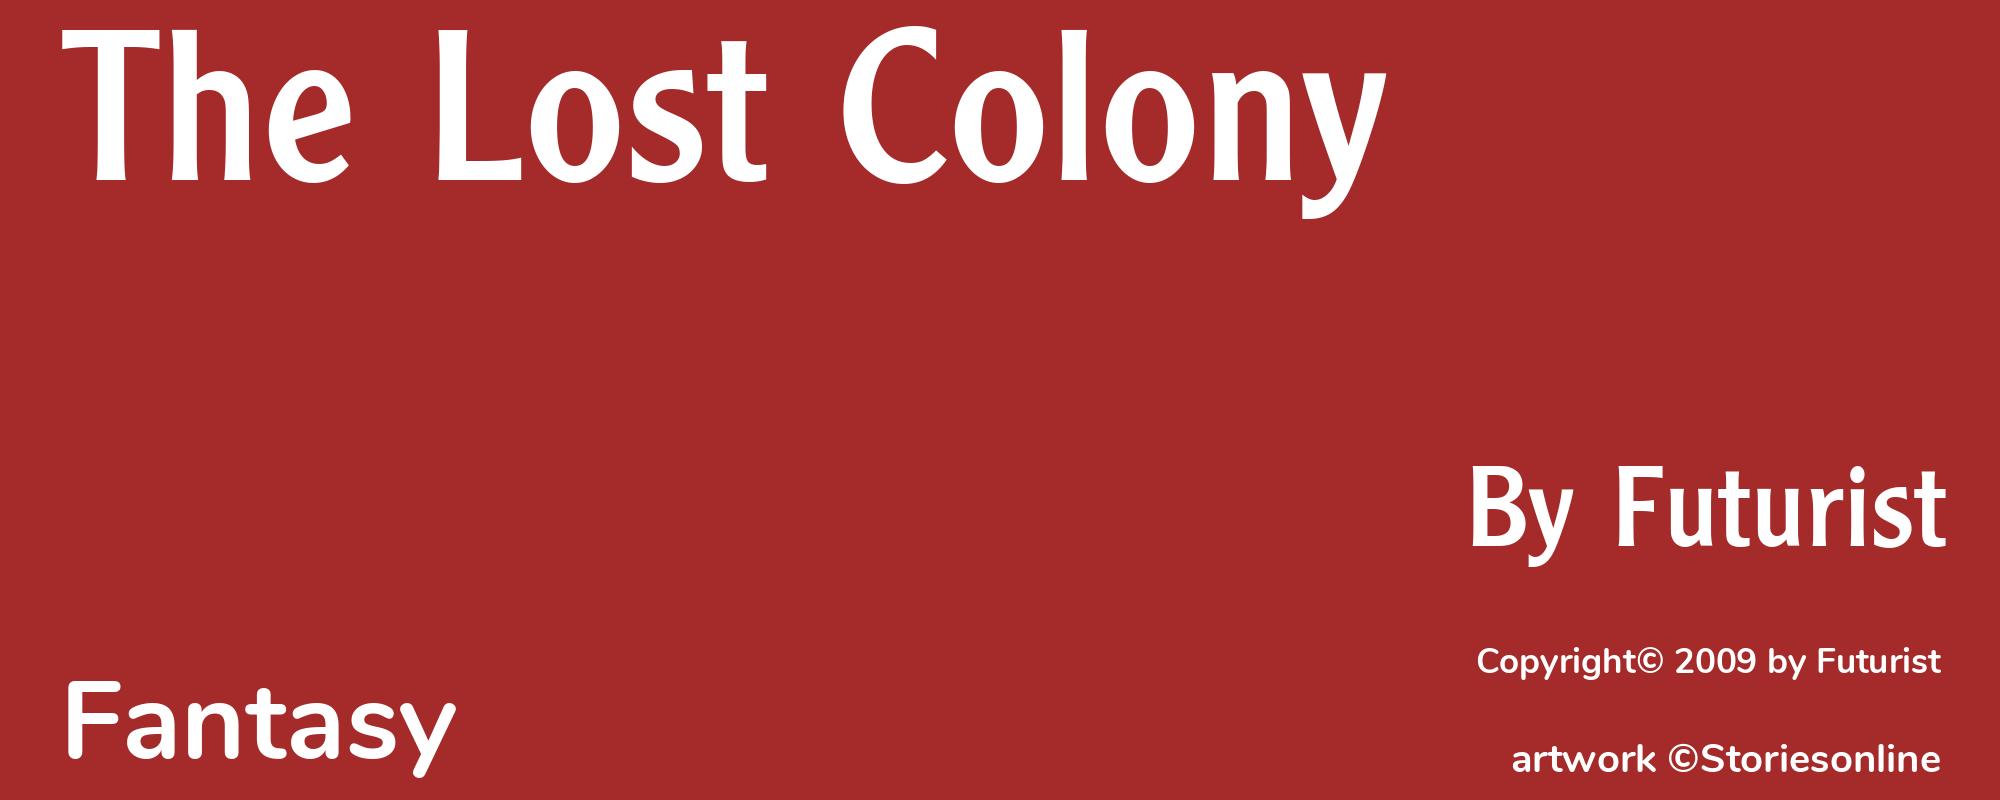 The Lost Colony - Cover